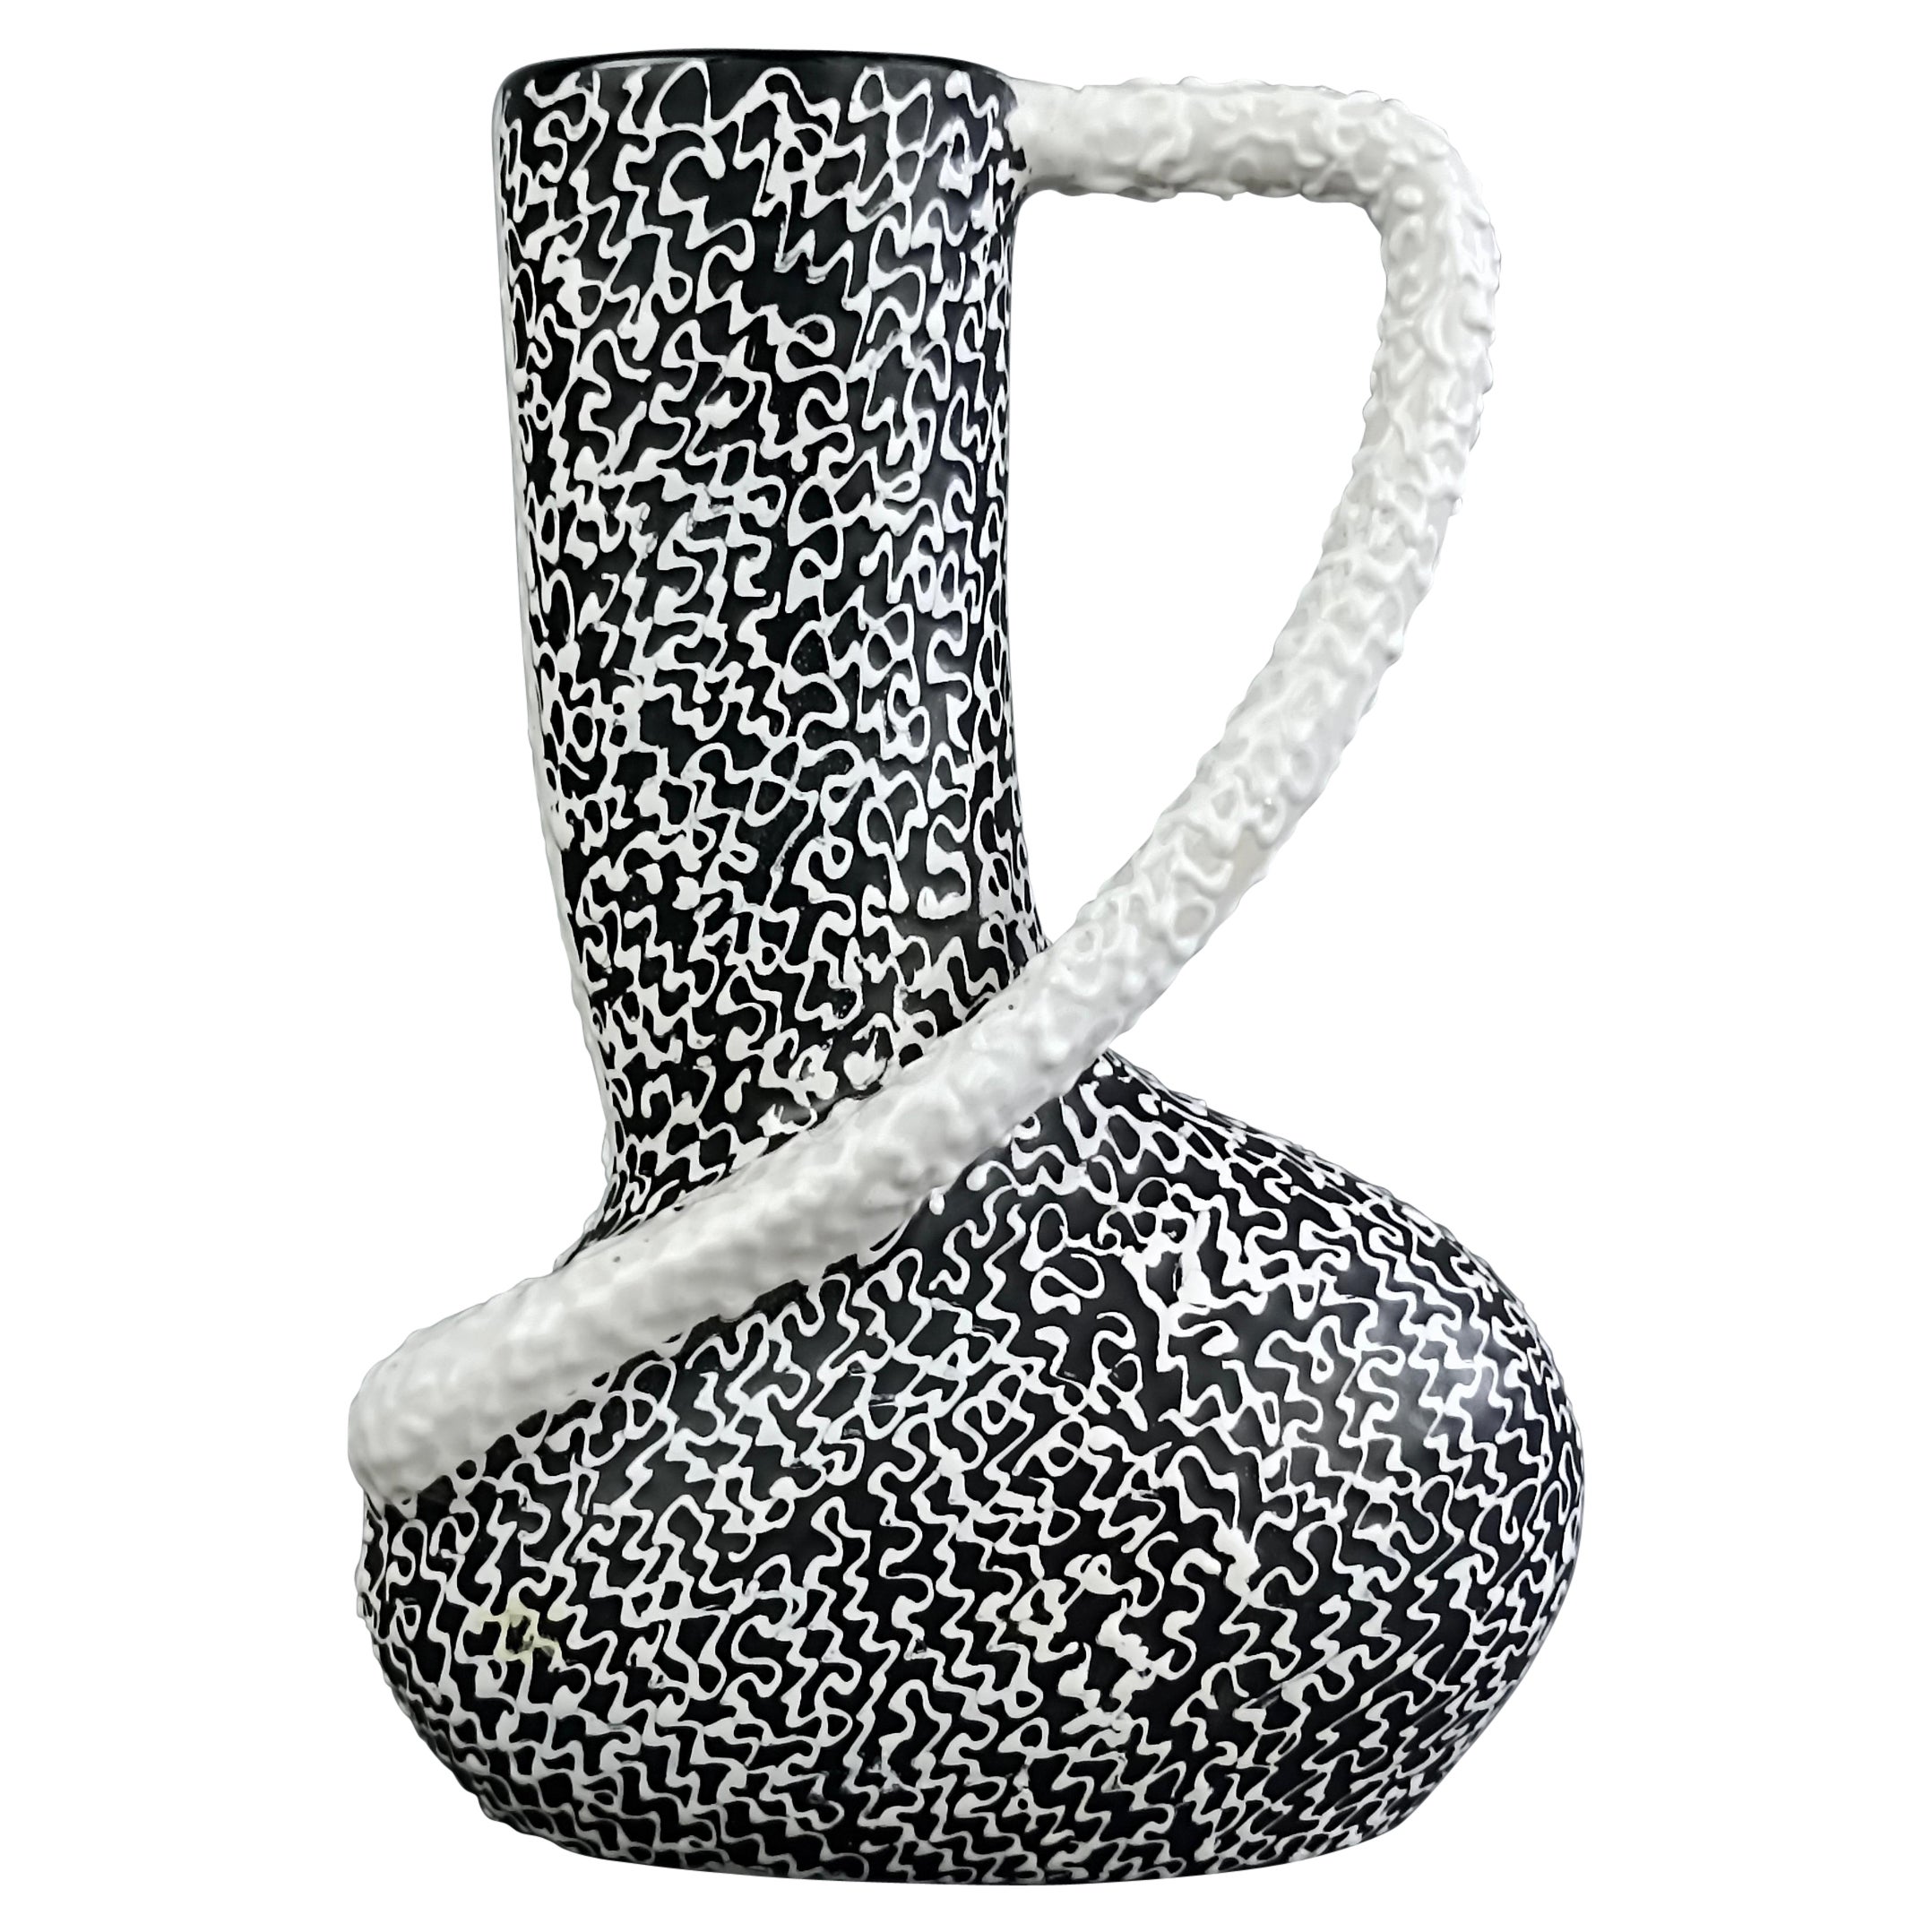 Elegant asymmetrical 1950s Italian Modernist style ceramic vase. The vase has a rather original shape, frontally it is black, as well as internally, while the back is white.
Equally particular and interesting is the shape of the handle applied